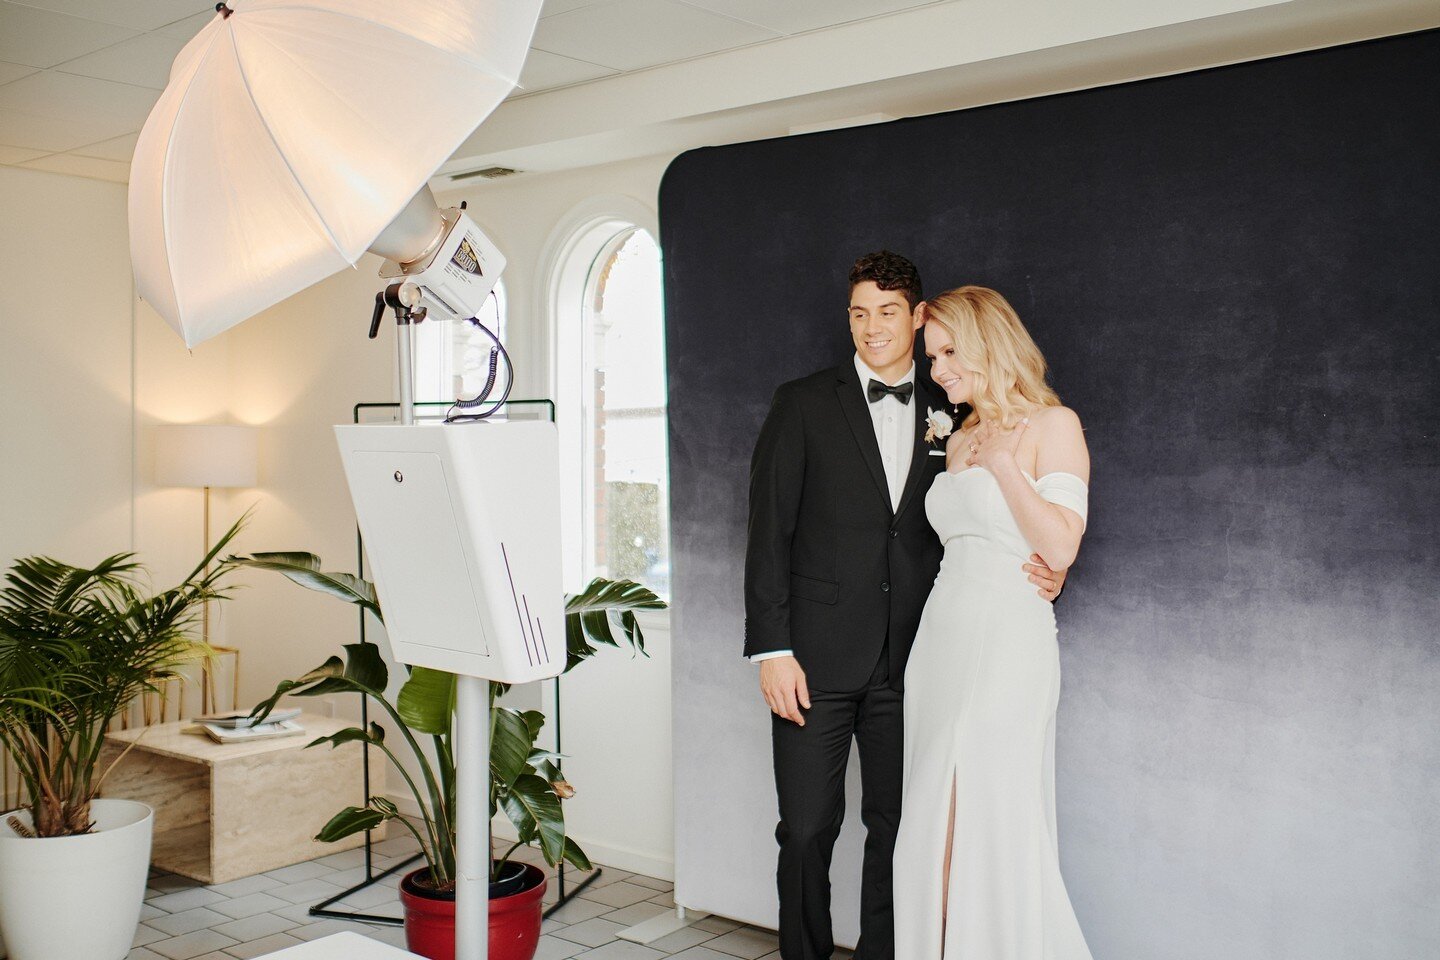 MDRN Photobooth was created out of a NEED. I saw a need for a newer tradition in weddings. 💍 It's time to shift away from only budgeting for florals when planning a wedding! ⁠
⁠
Photobooths aren't tacky anymore, in fact they add an aesthetic flair a